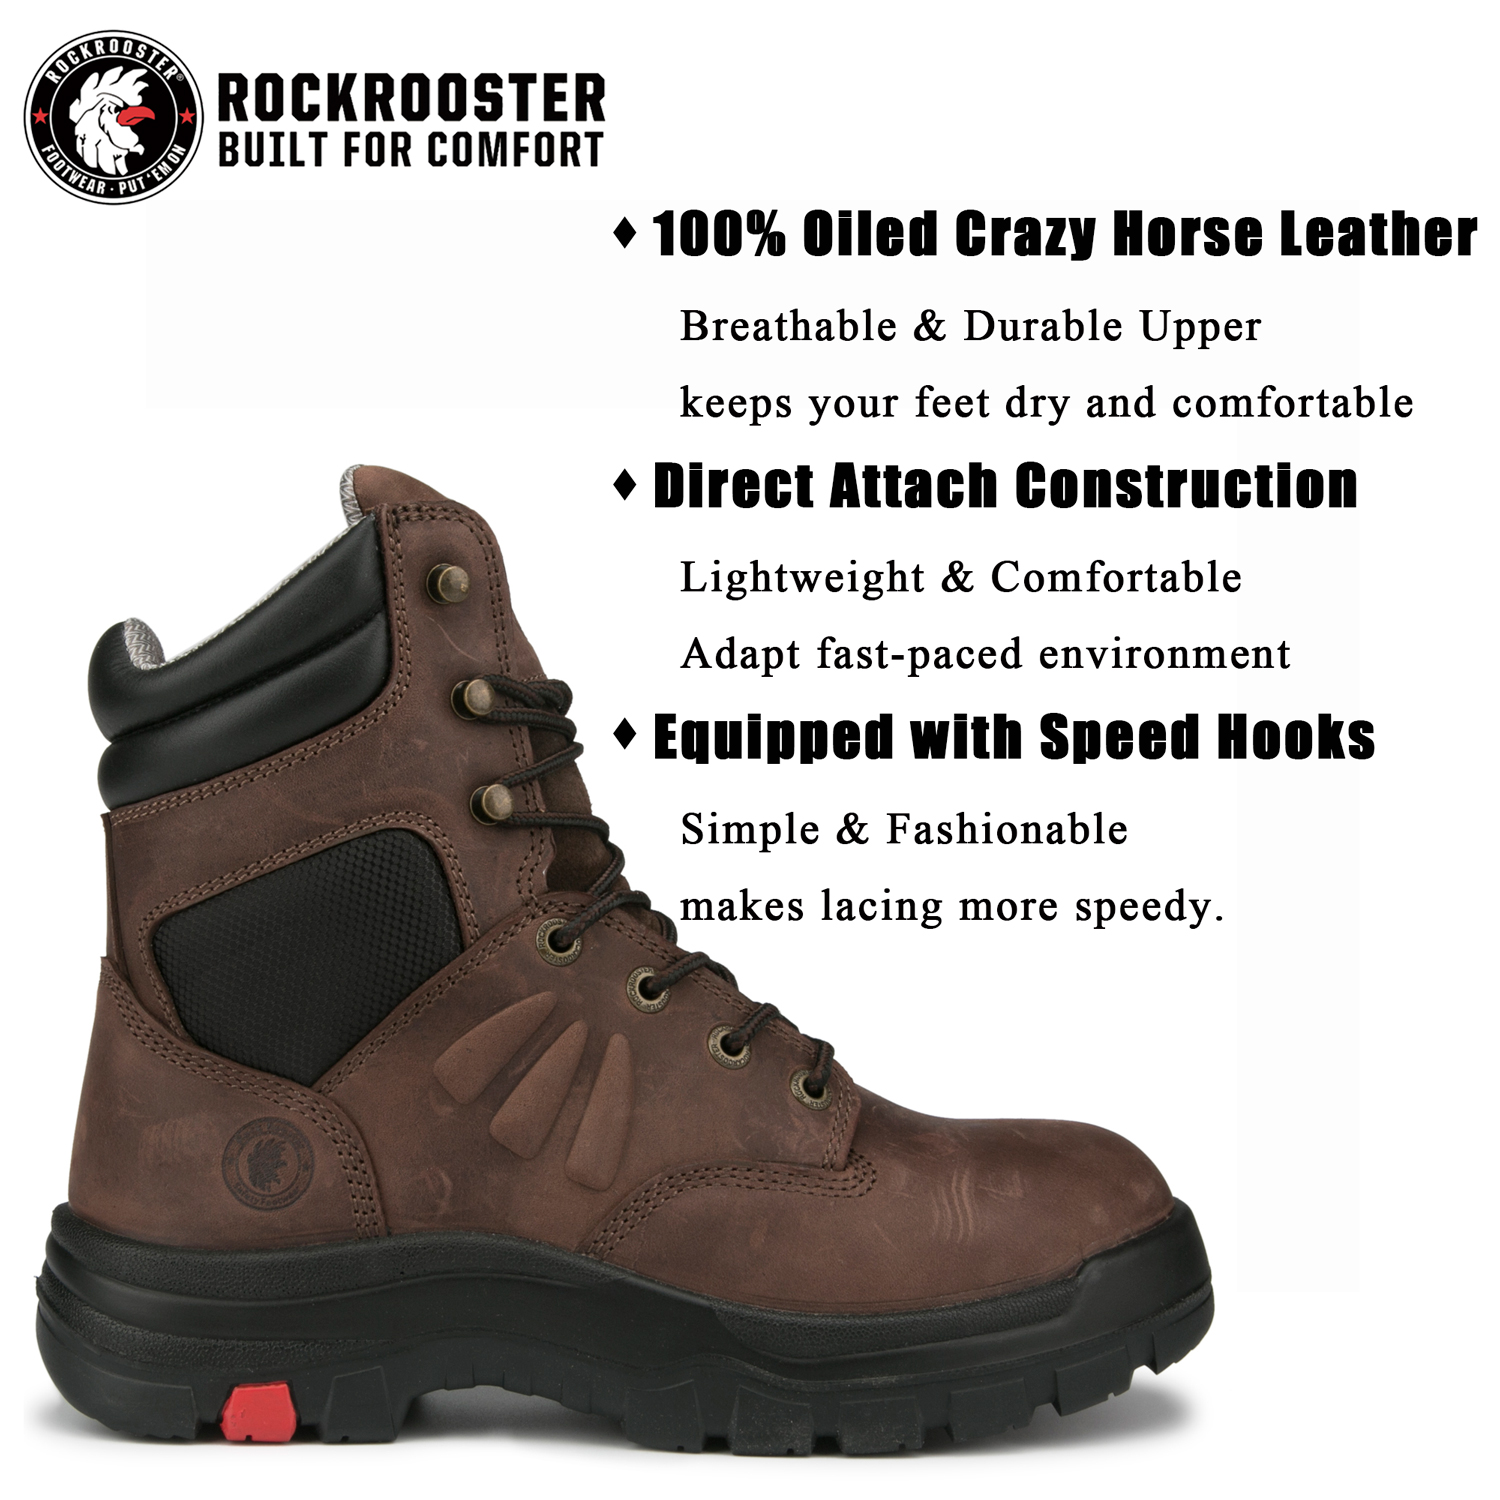 ROCKROOSTER Garland Steel Toe Waterproof Work Boots for men 8 inch Wide Width EE Oiled Crazy Horse Leather Slip resistant boots AK428-12 - image 3 of 7